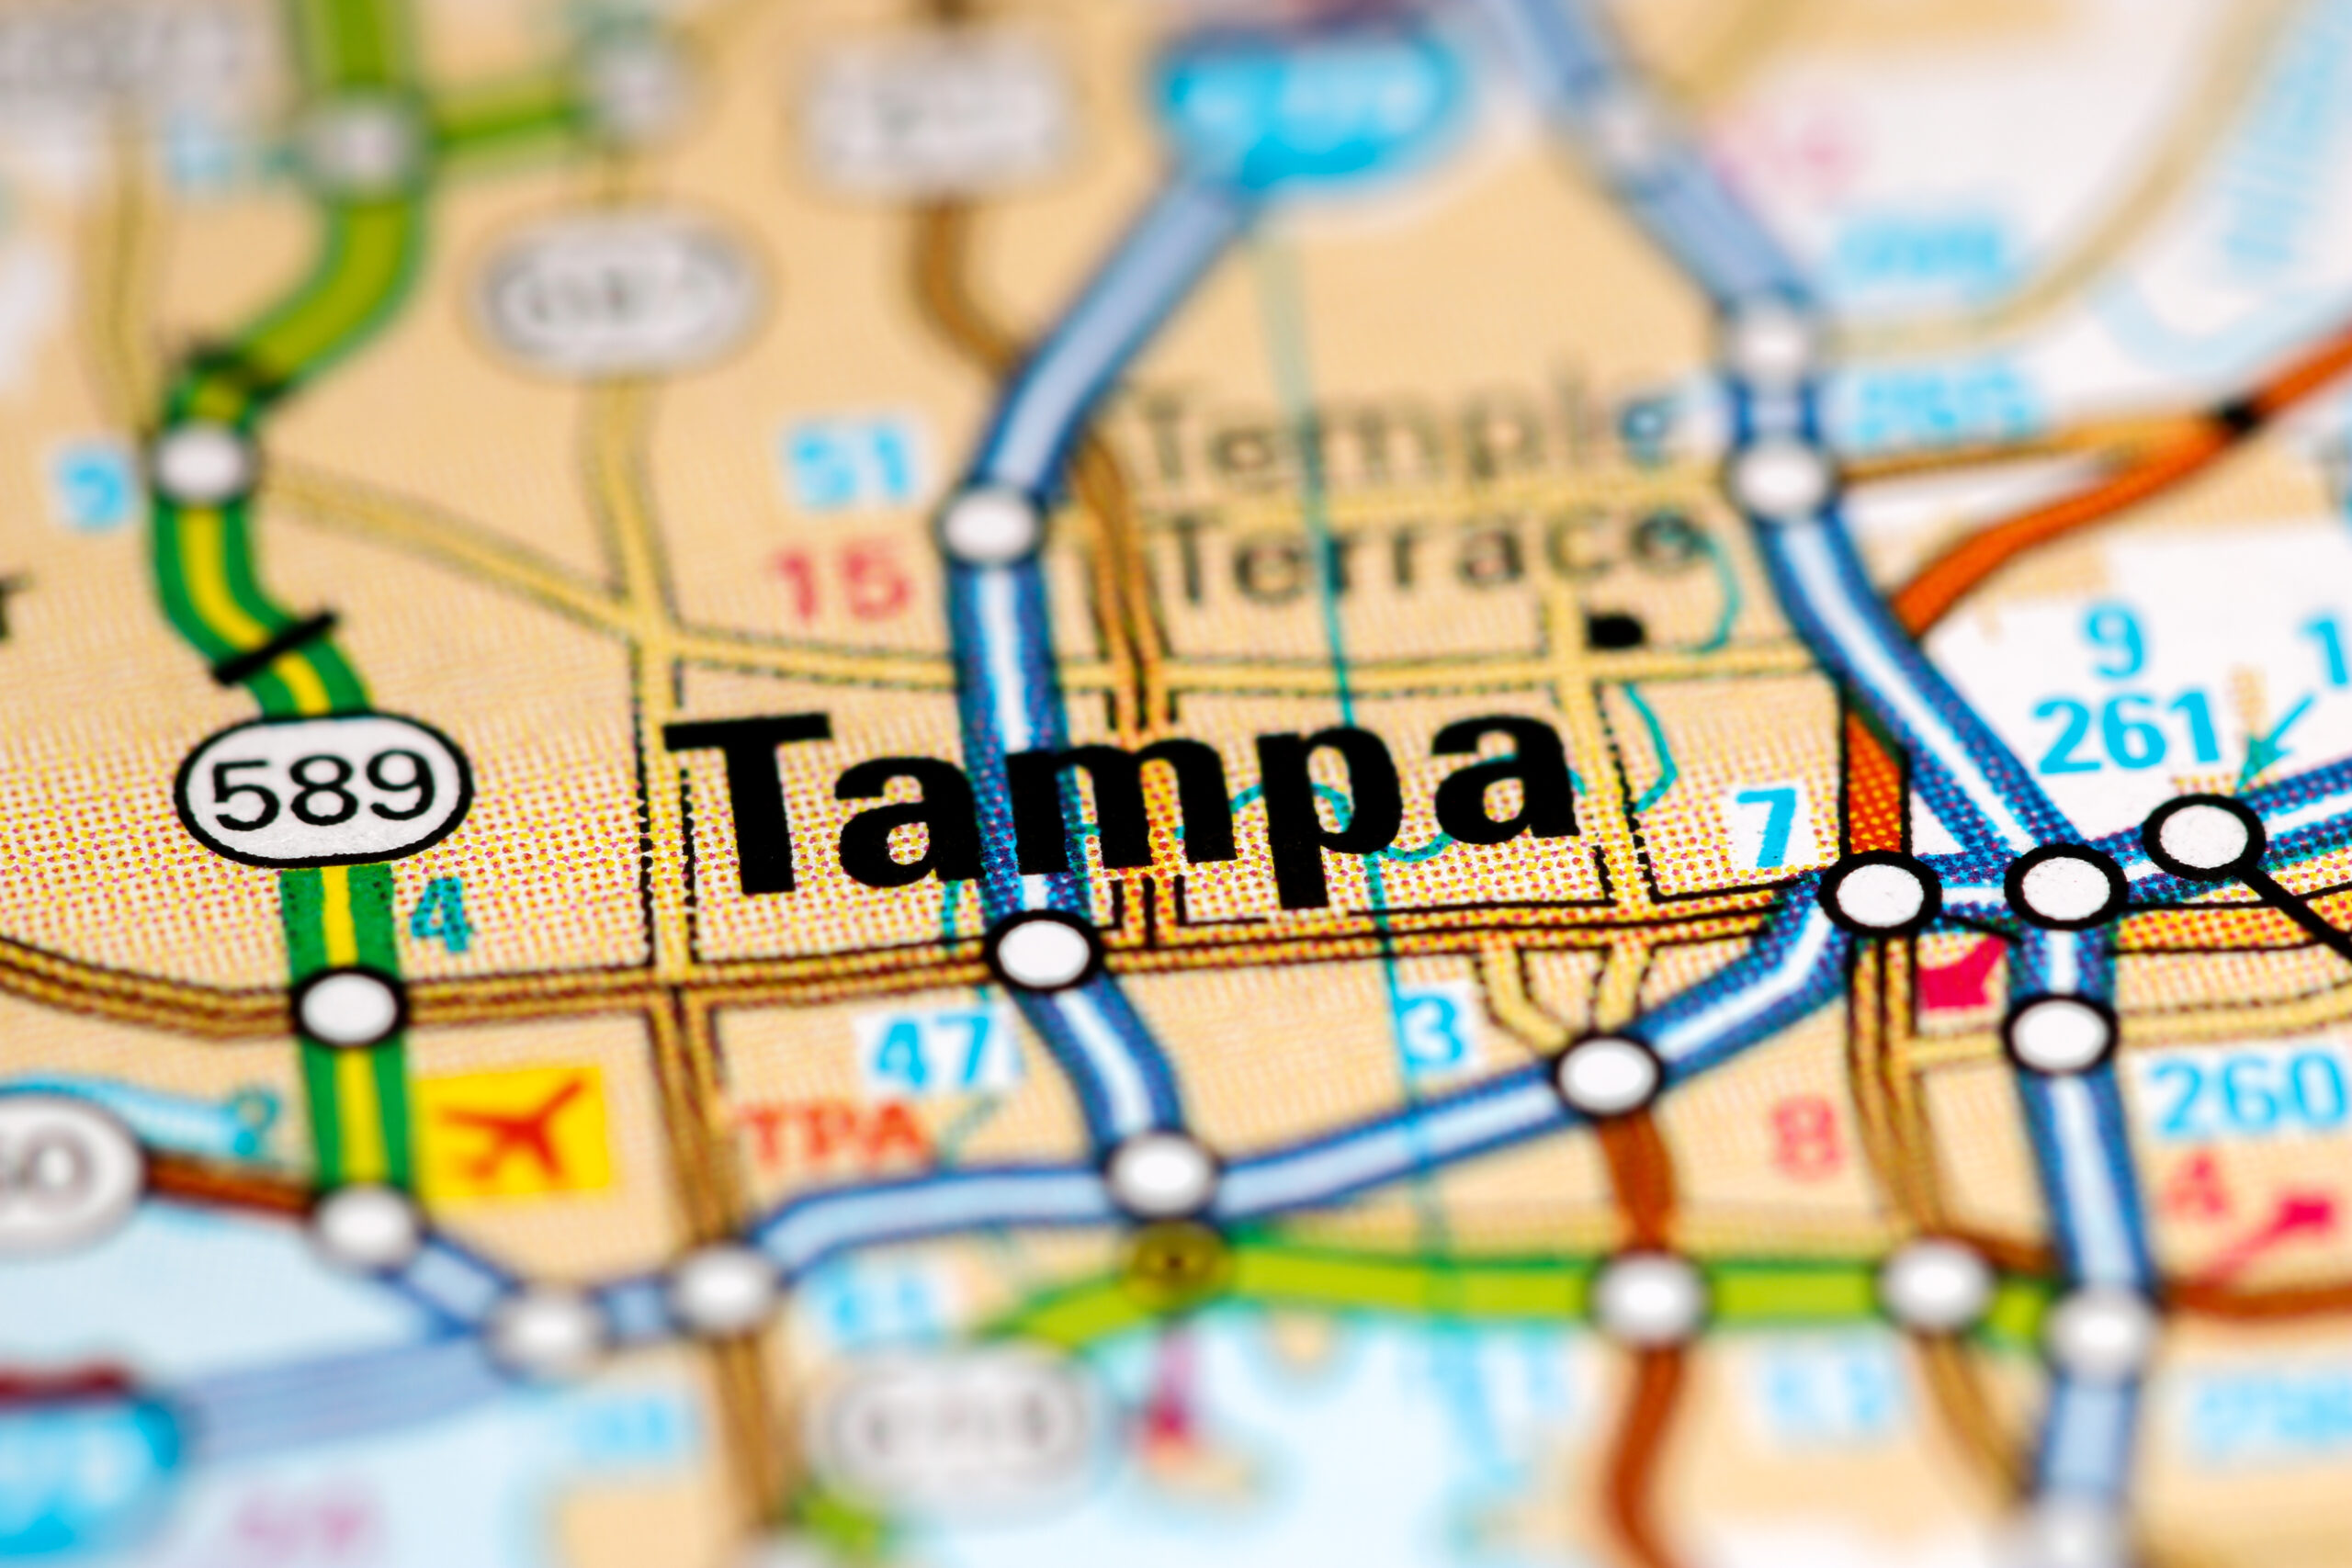 HopSkipDrive launches in Tampa, Florida!